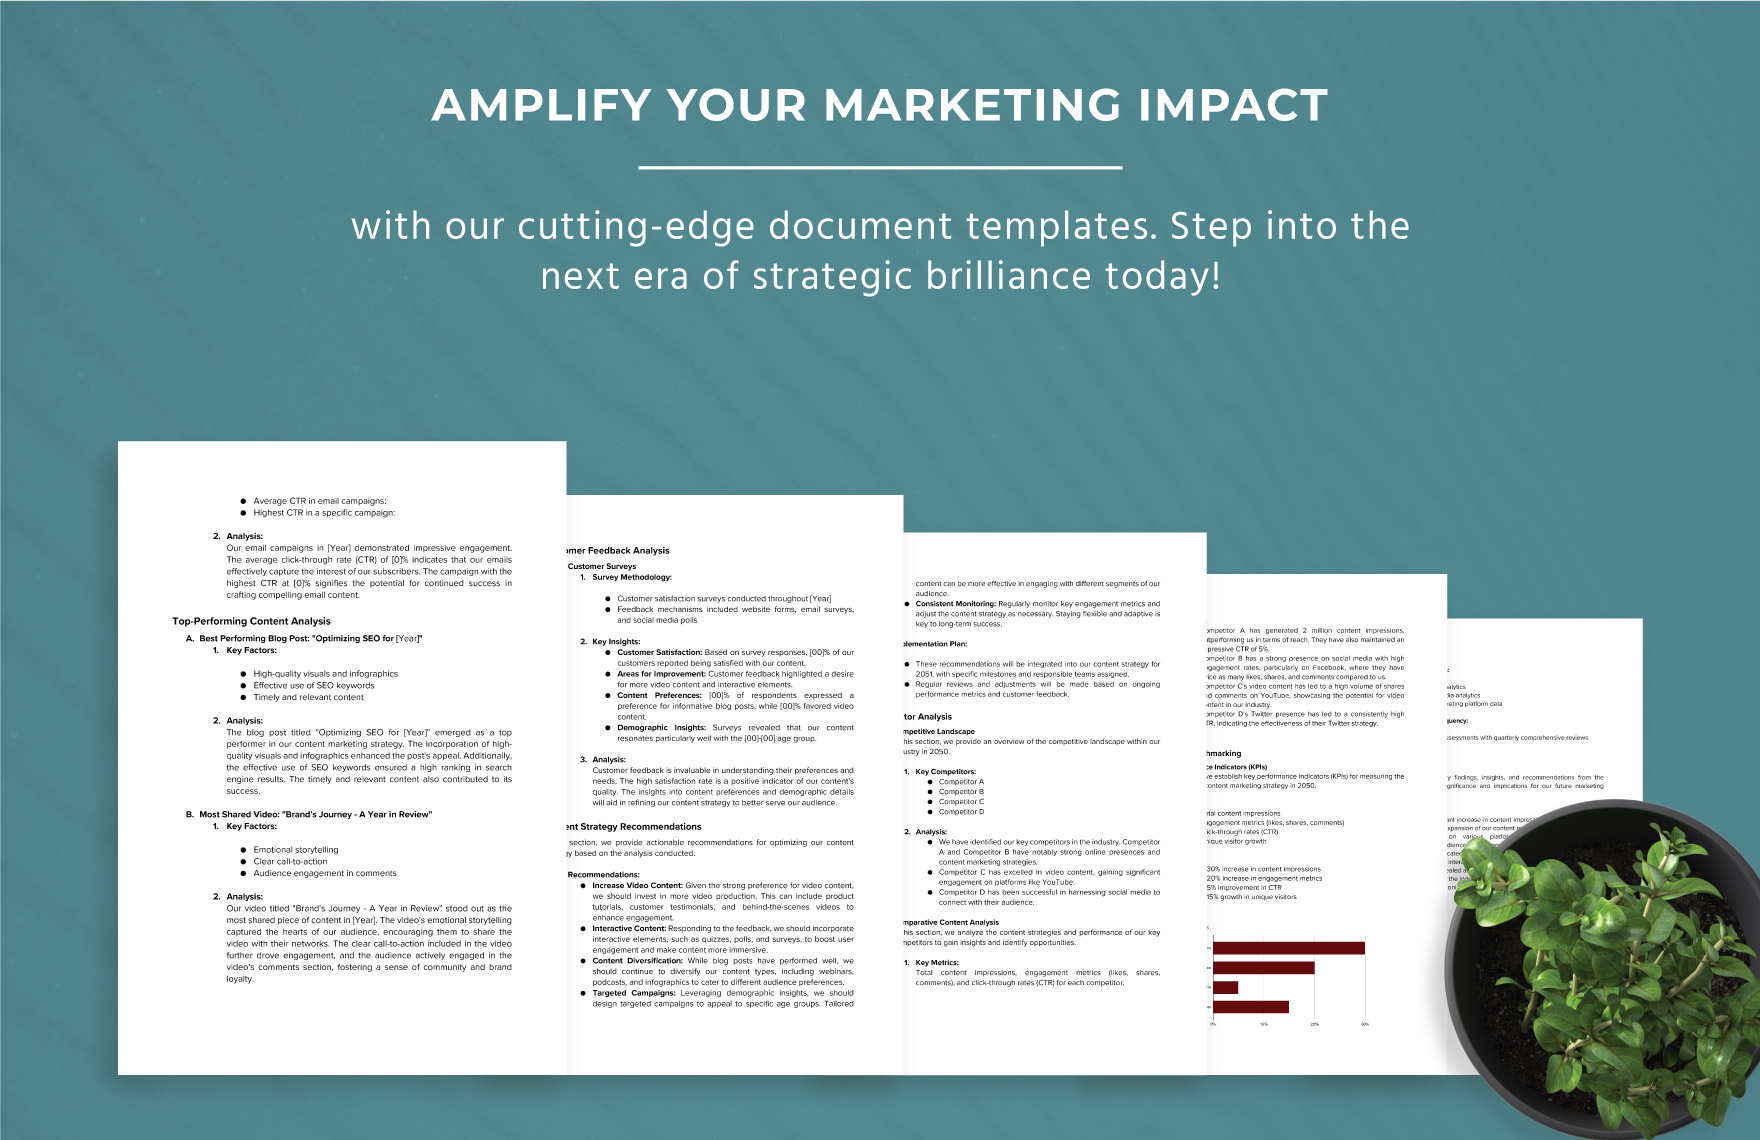 Marketing Content Performance Analysis Template